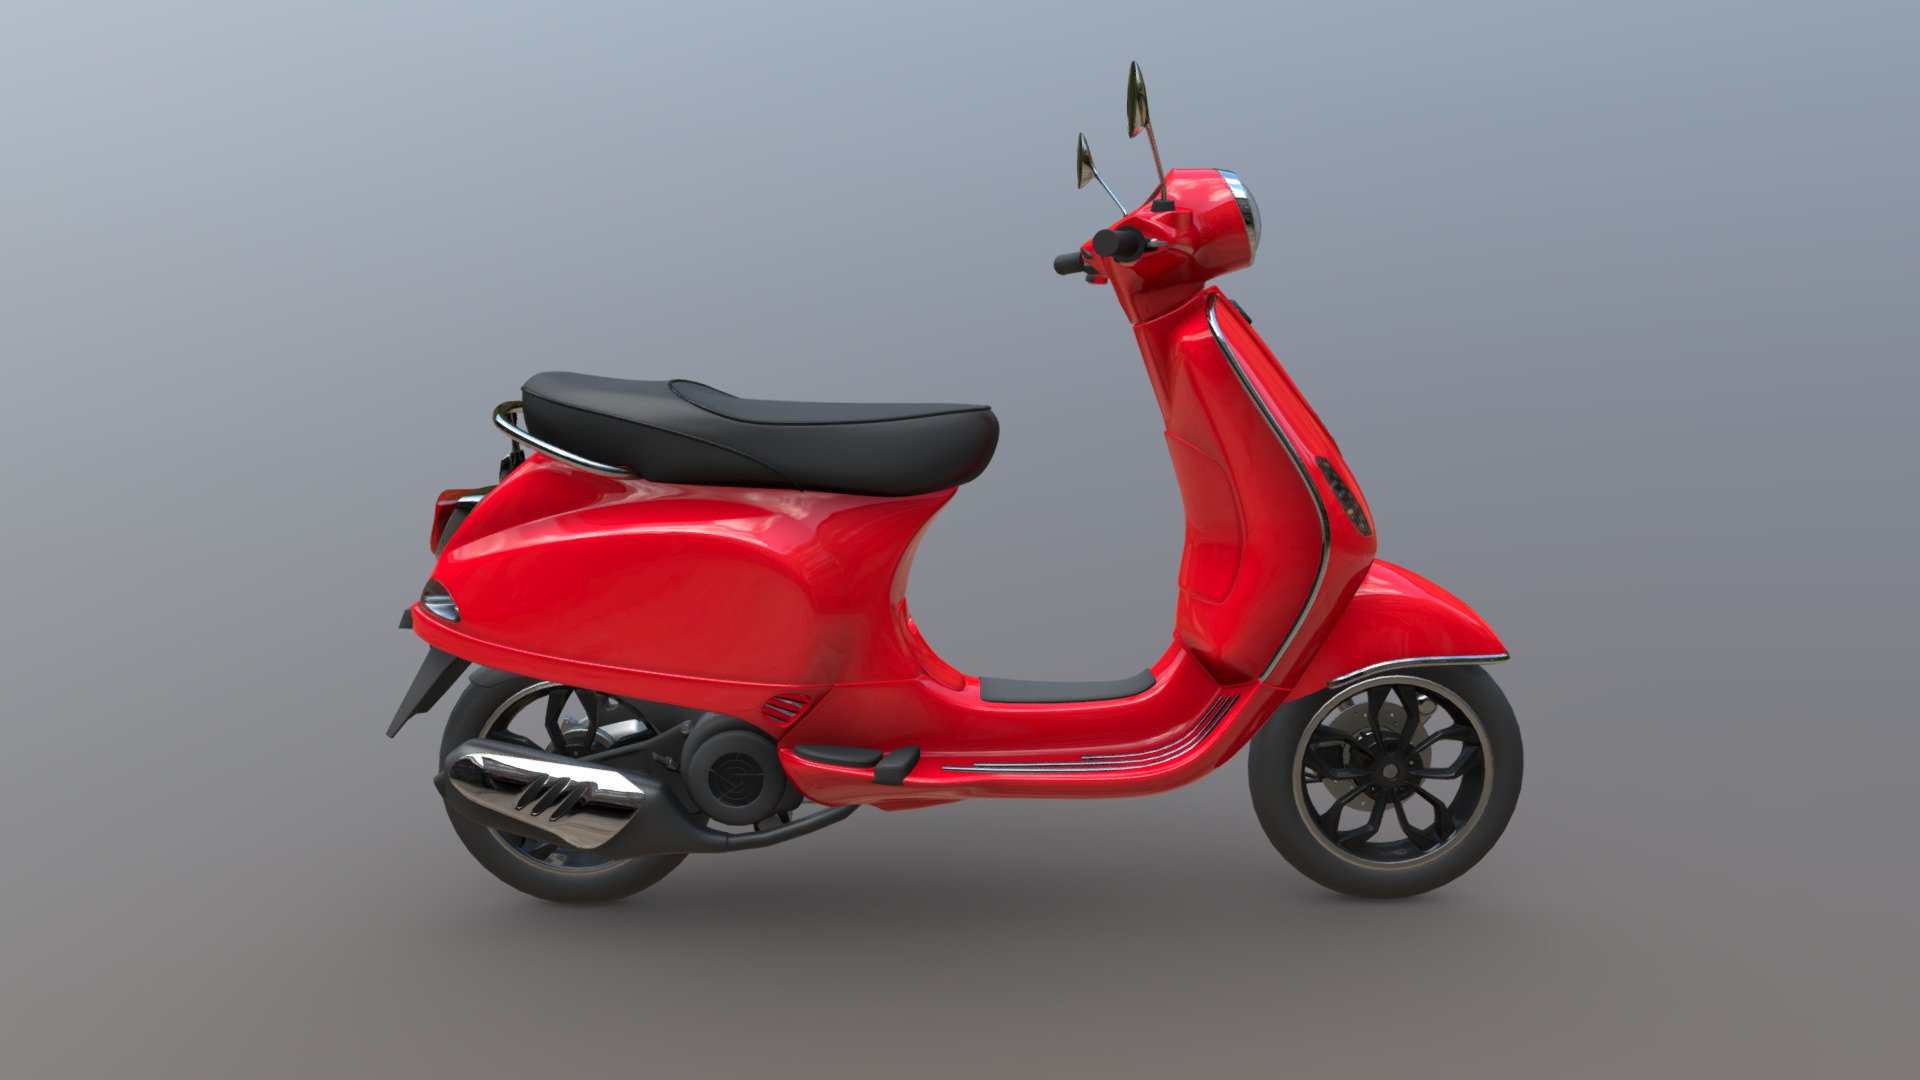 Piaggio Vespa LX 125 (2012) motorcycle from italy.
Created in Blender3D 3.1.0 - Piaggio Vespa LX 125 - Buy Royalty Free 3D model by remtromol 3d model